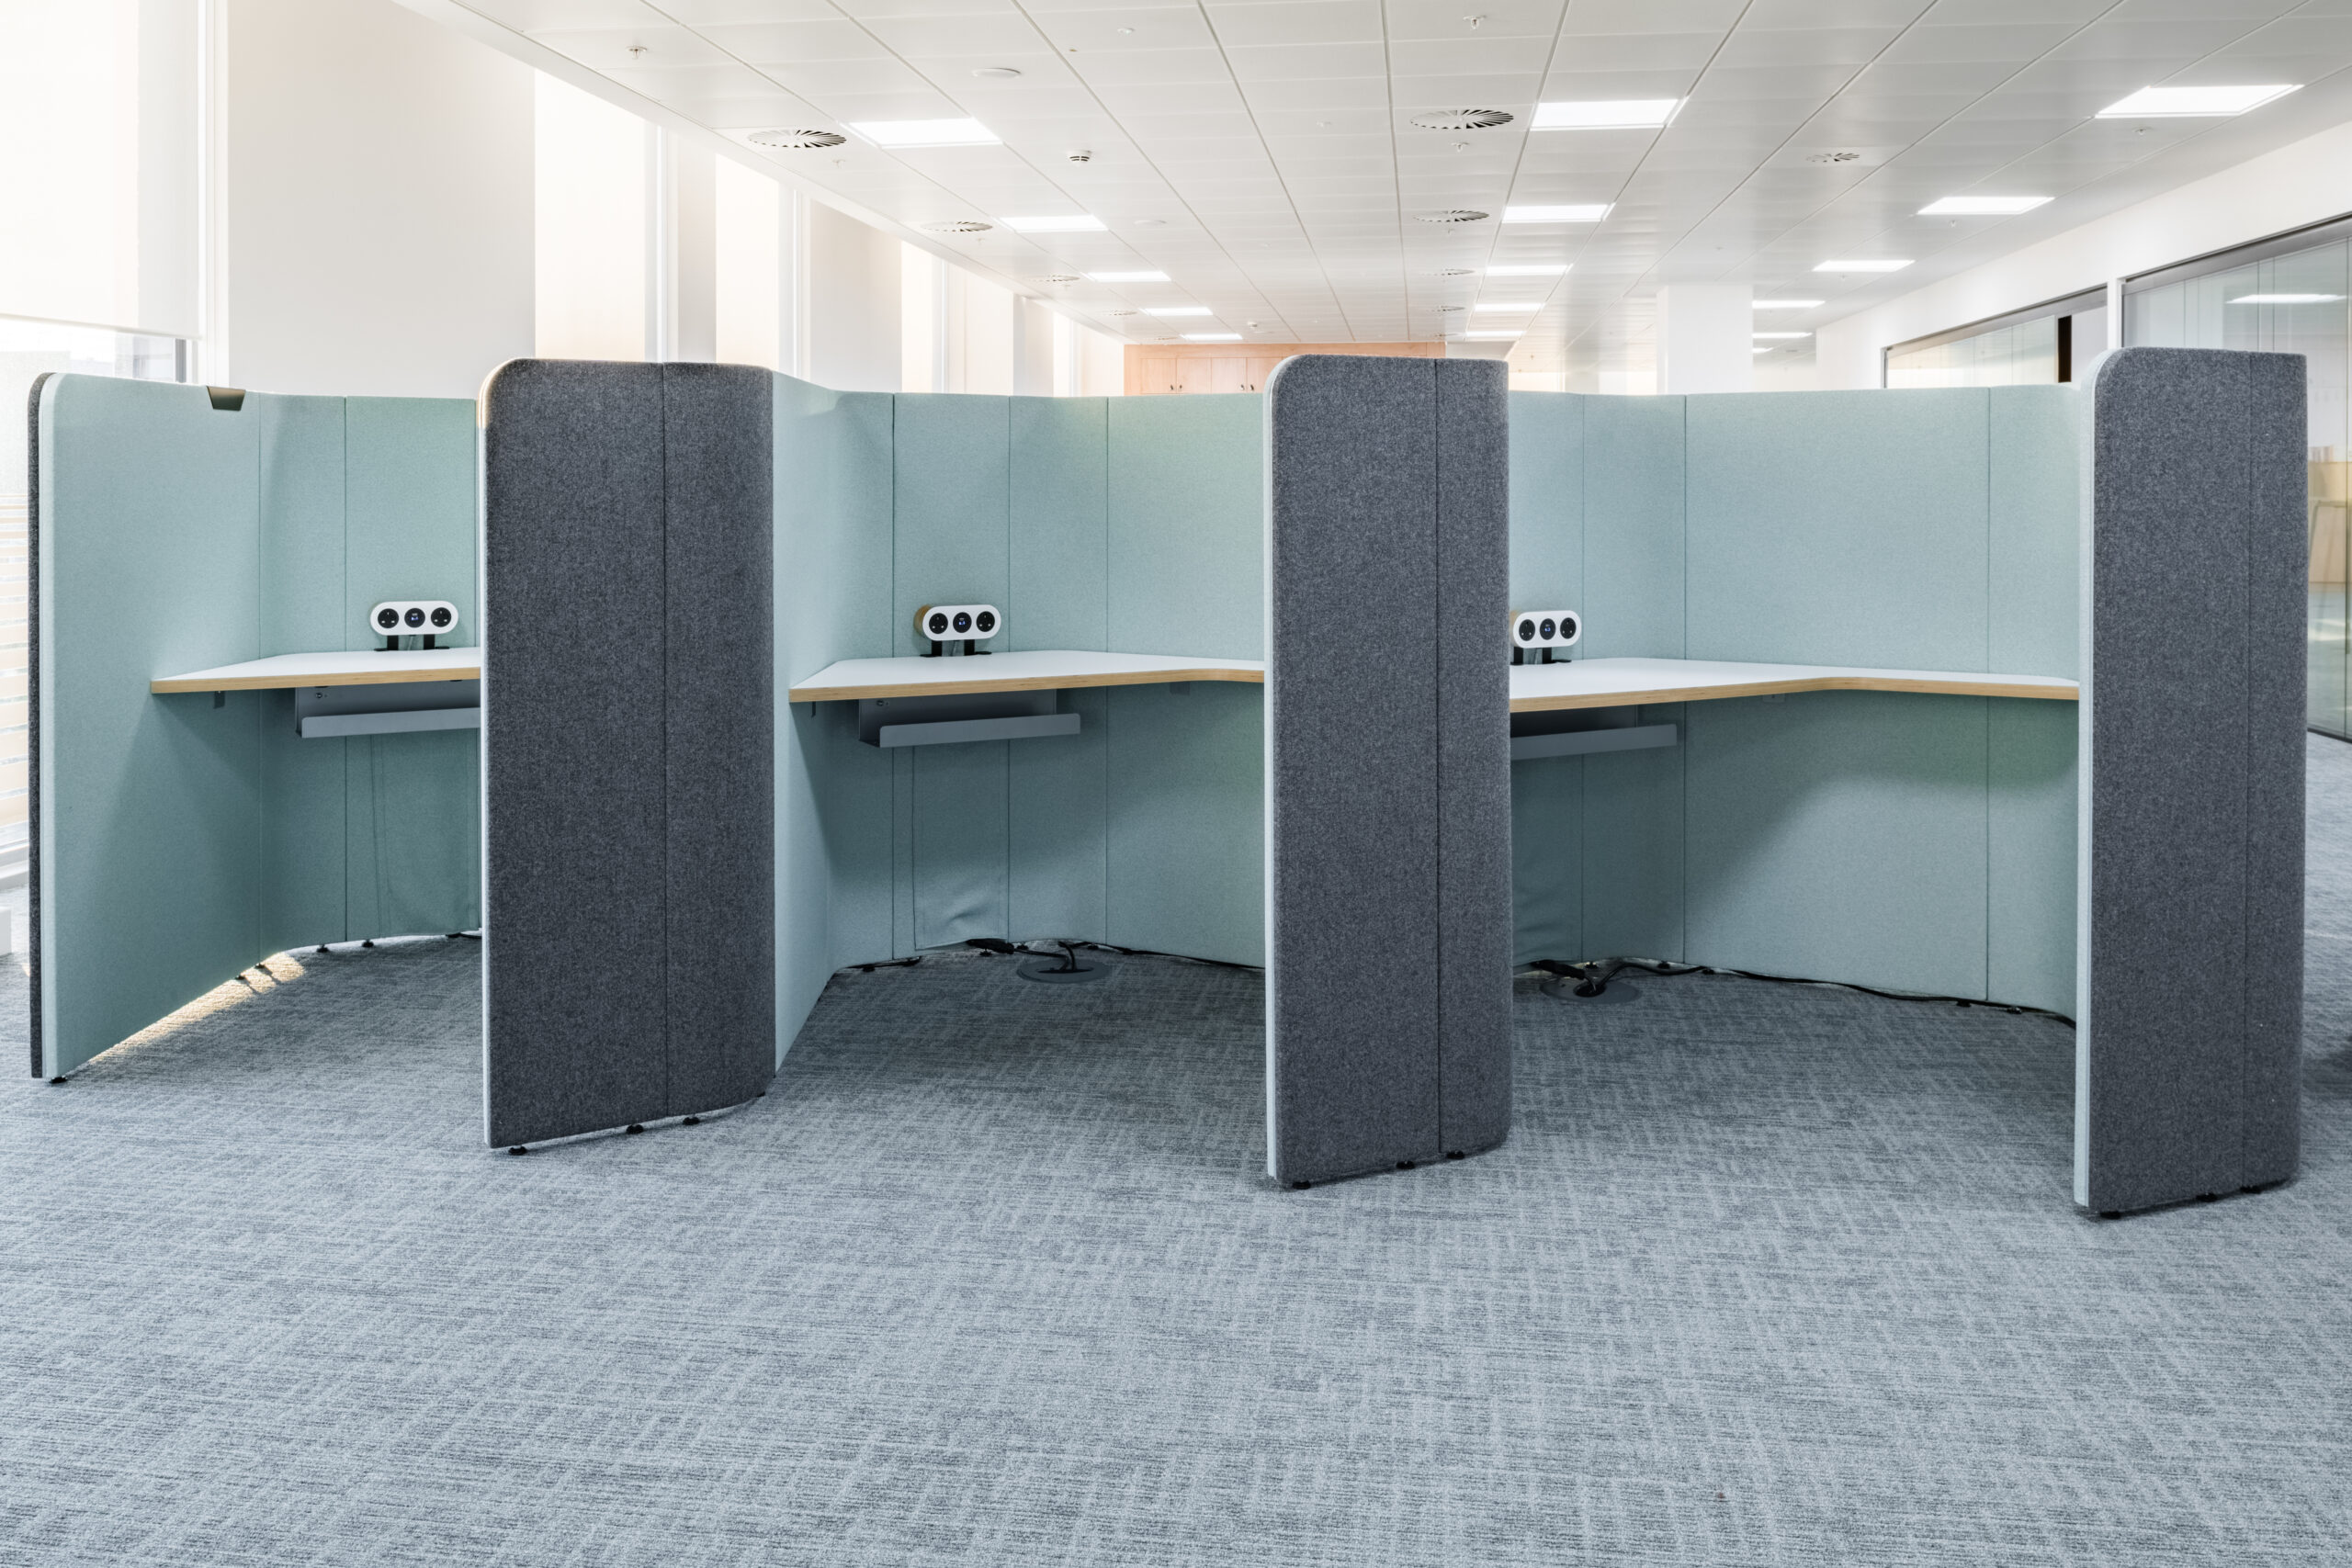 A group of Ocee and Four Design office work booths and office cubicles in an open office at Crawley Council Town Hall.